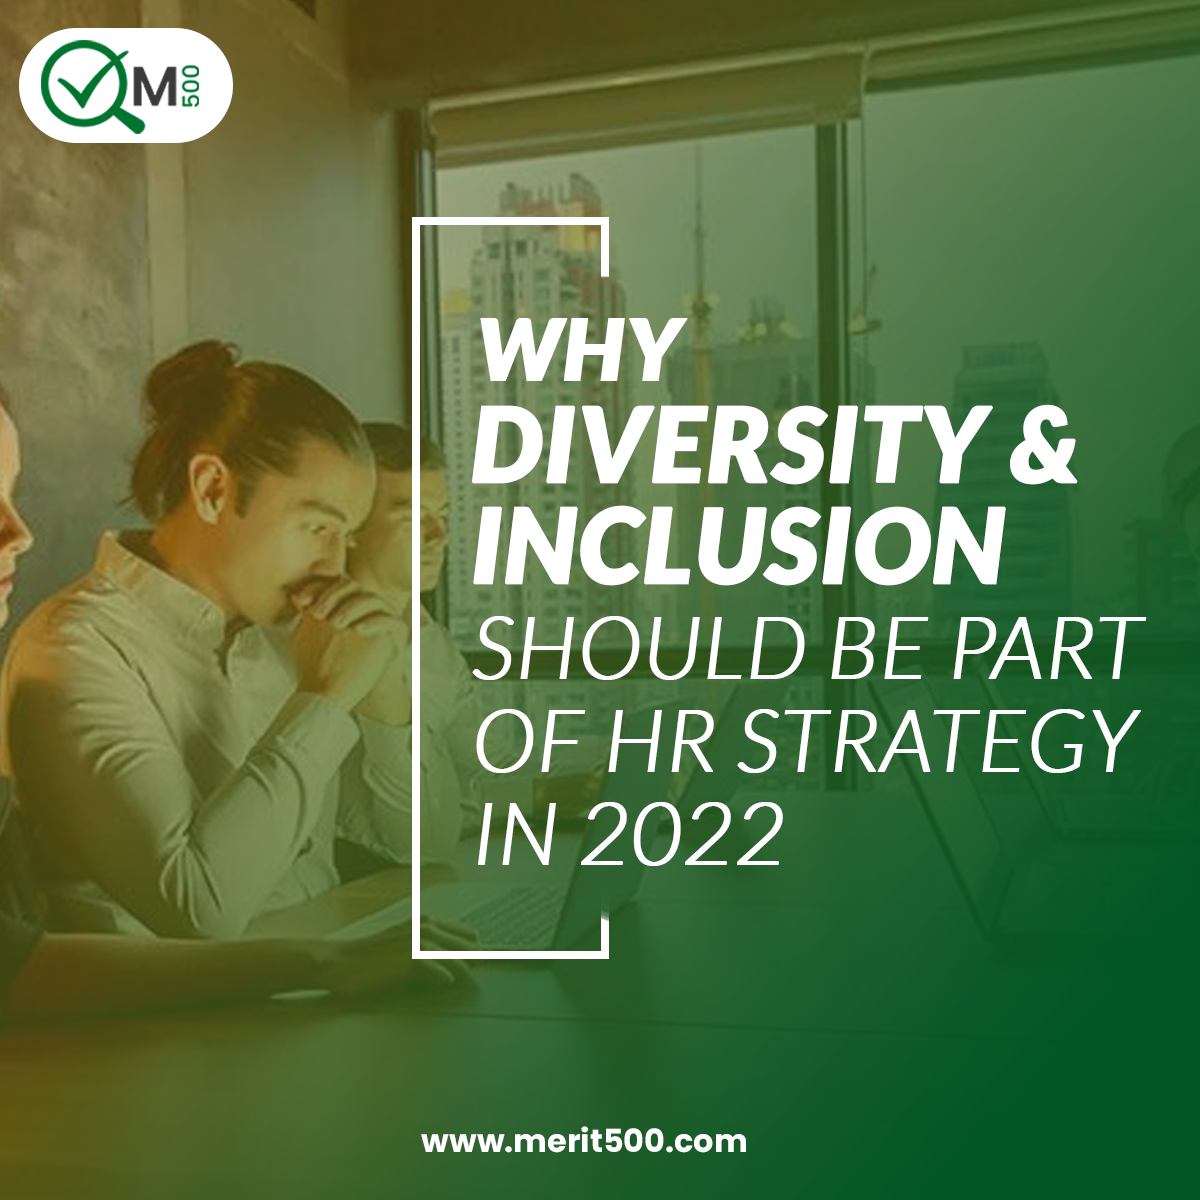 Why Diversity & Inclusion should be a part of HR Strategy in 2022